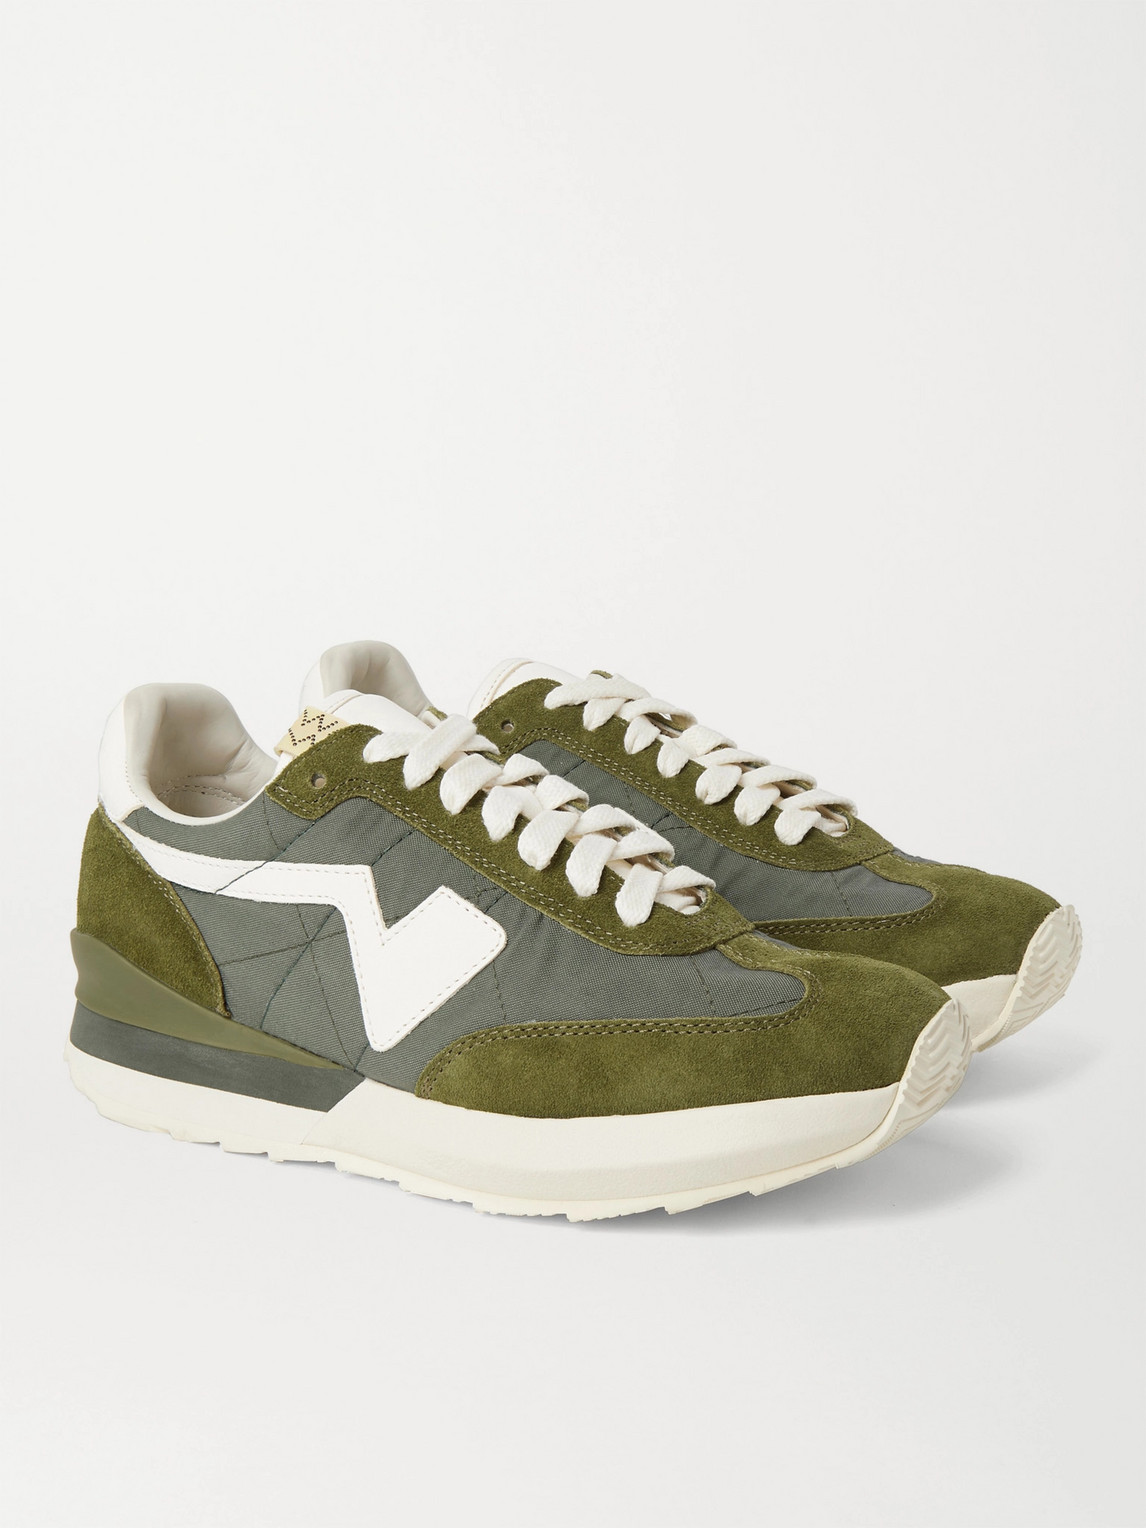 VISVIM FKT RUNNER SUEDE- AND LEATHER-TRIMMED NYLON-BLEND SNEAKERS